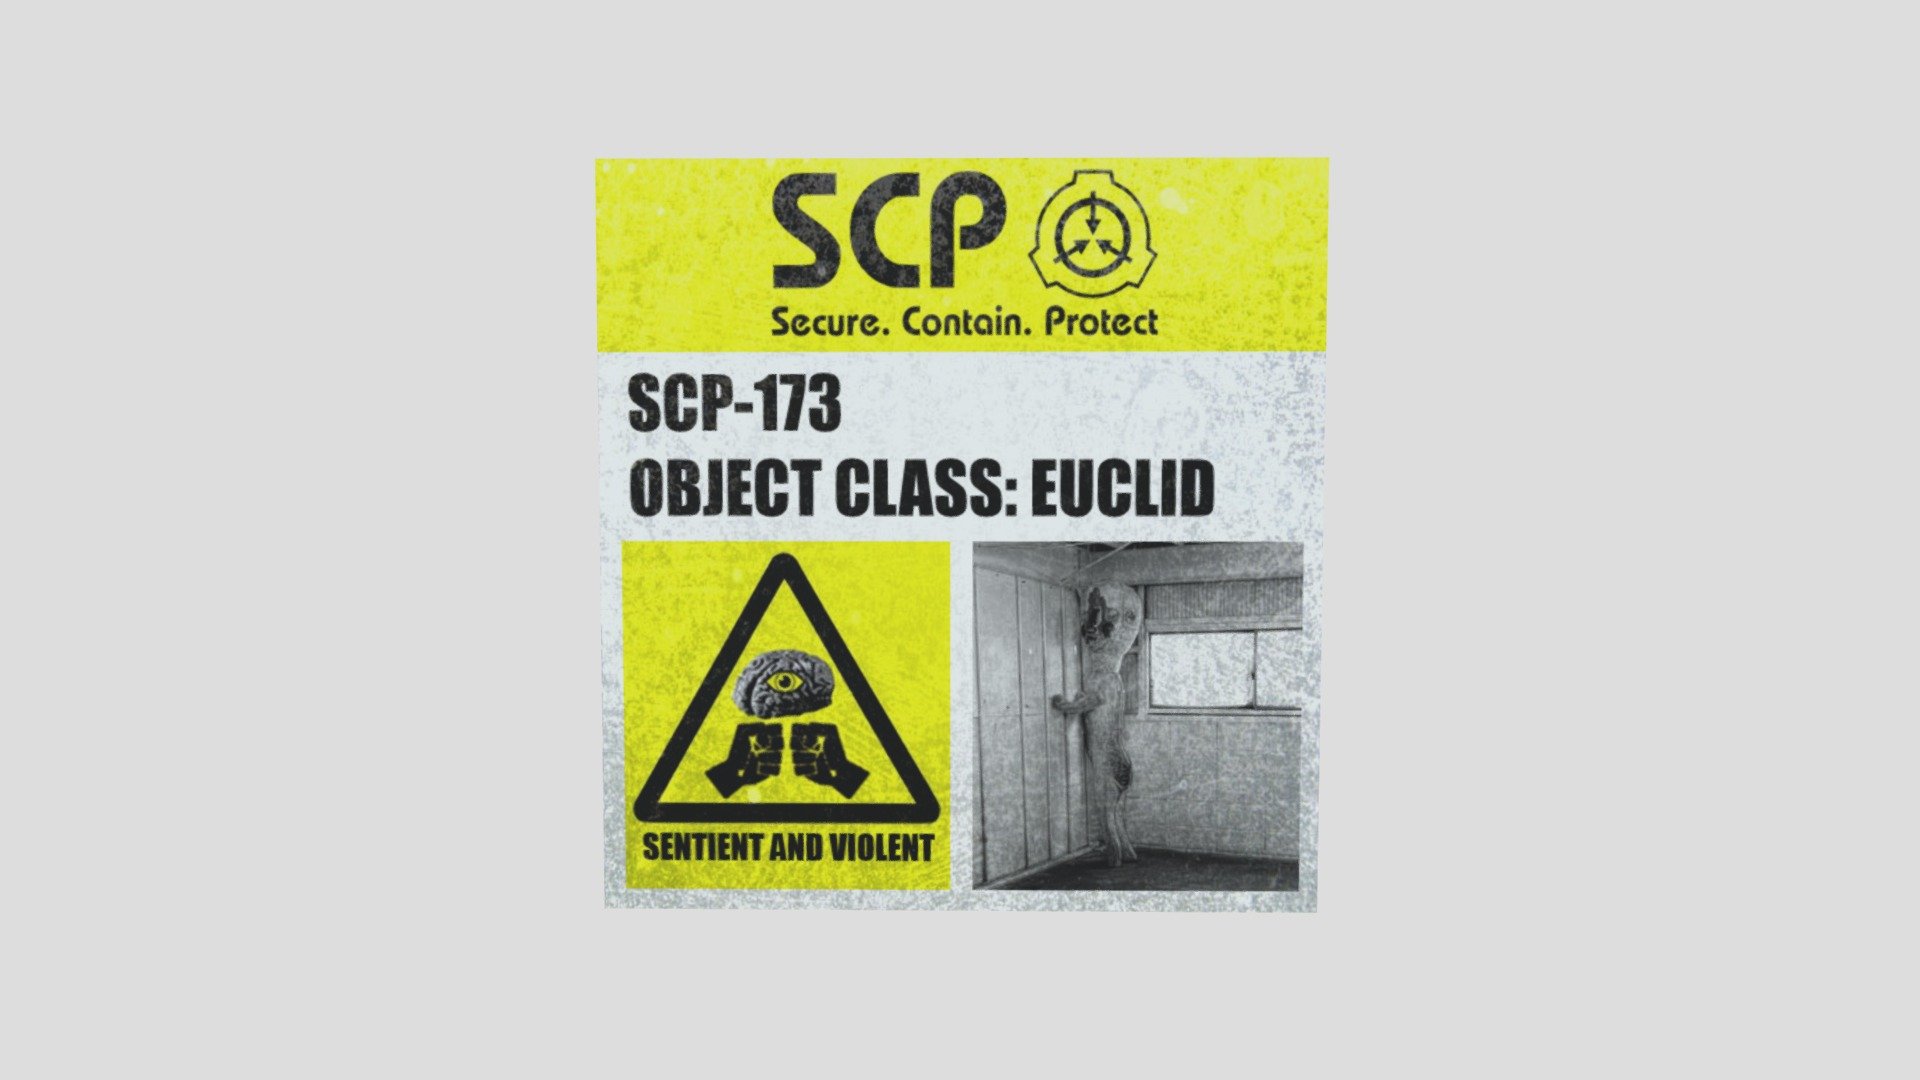 SCP-173 HAS BEEN CHANGED!!  SCP Containment Breach UNITY REMAKE